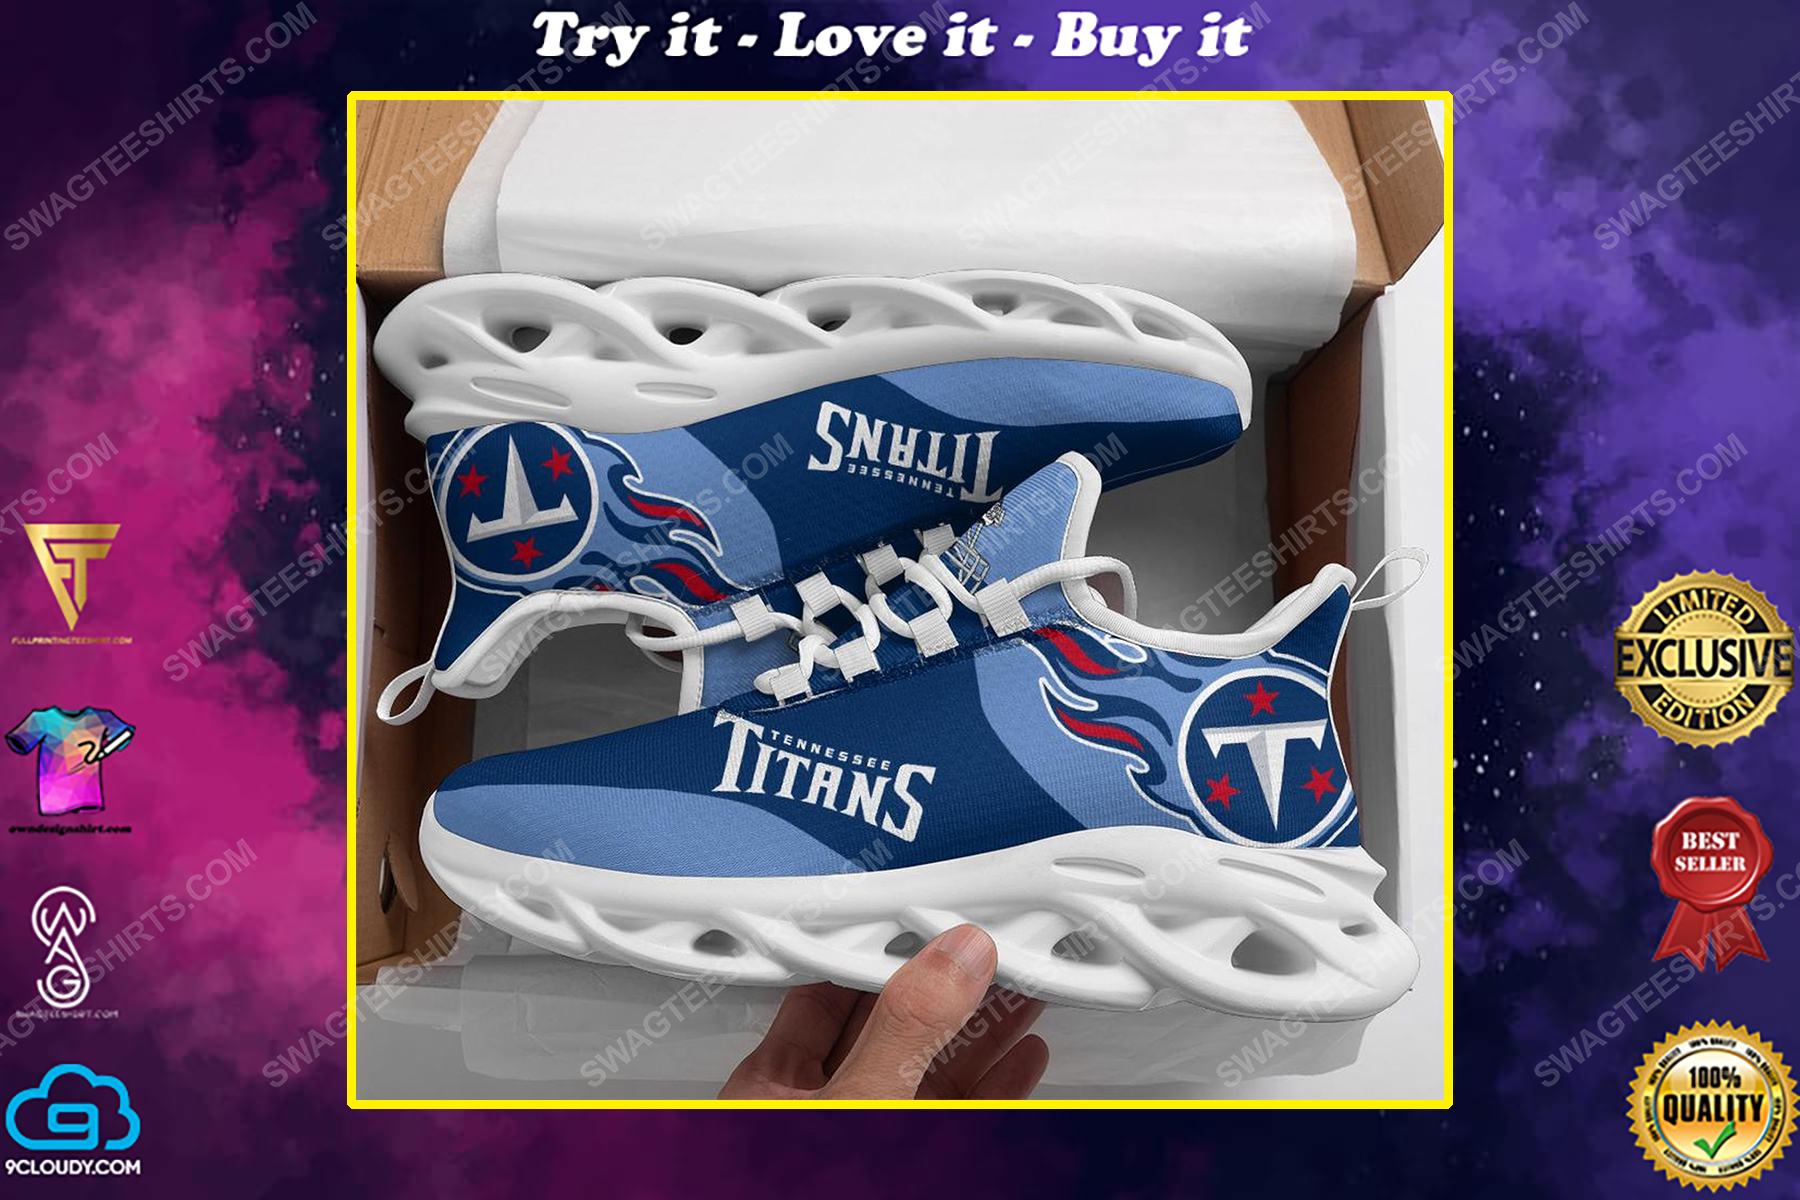 The tennessee titans football team max soul shoes